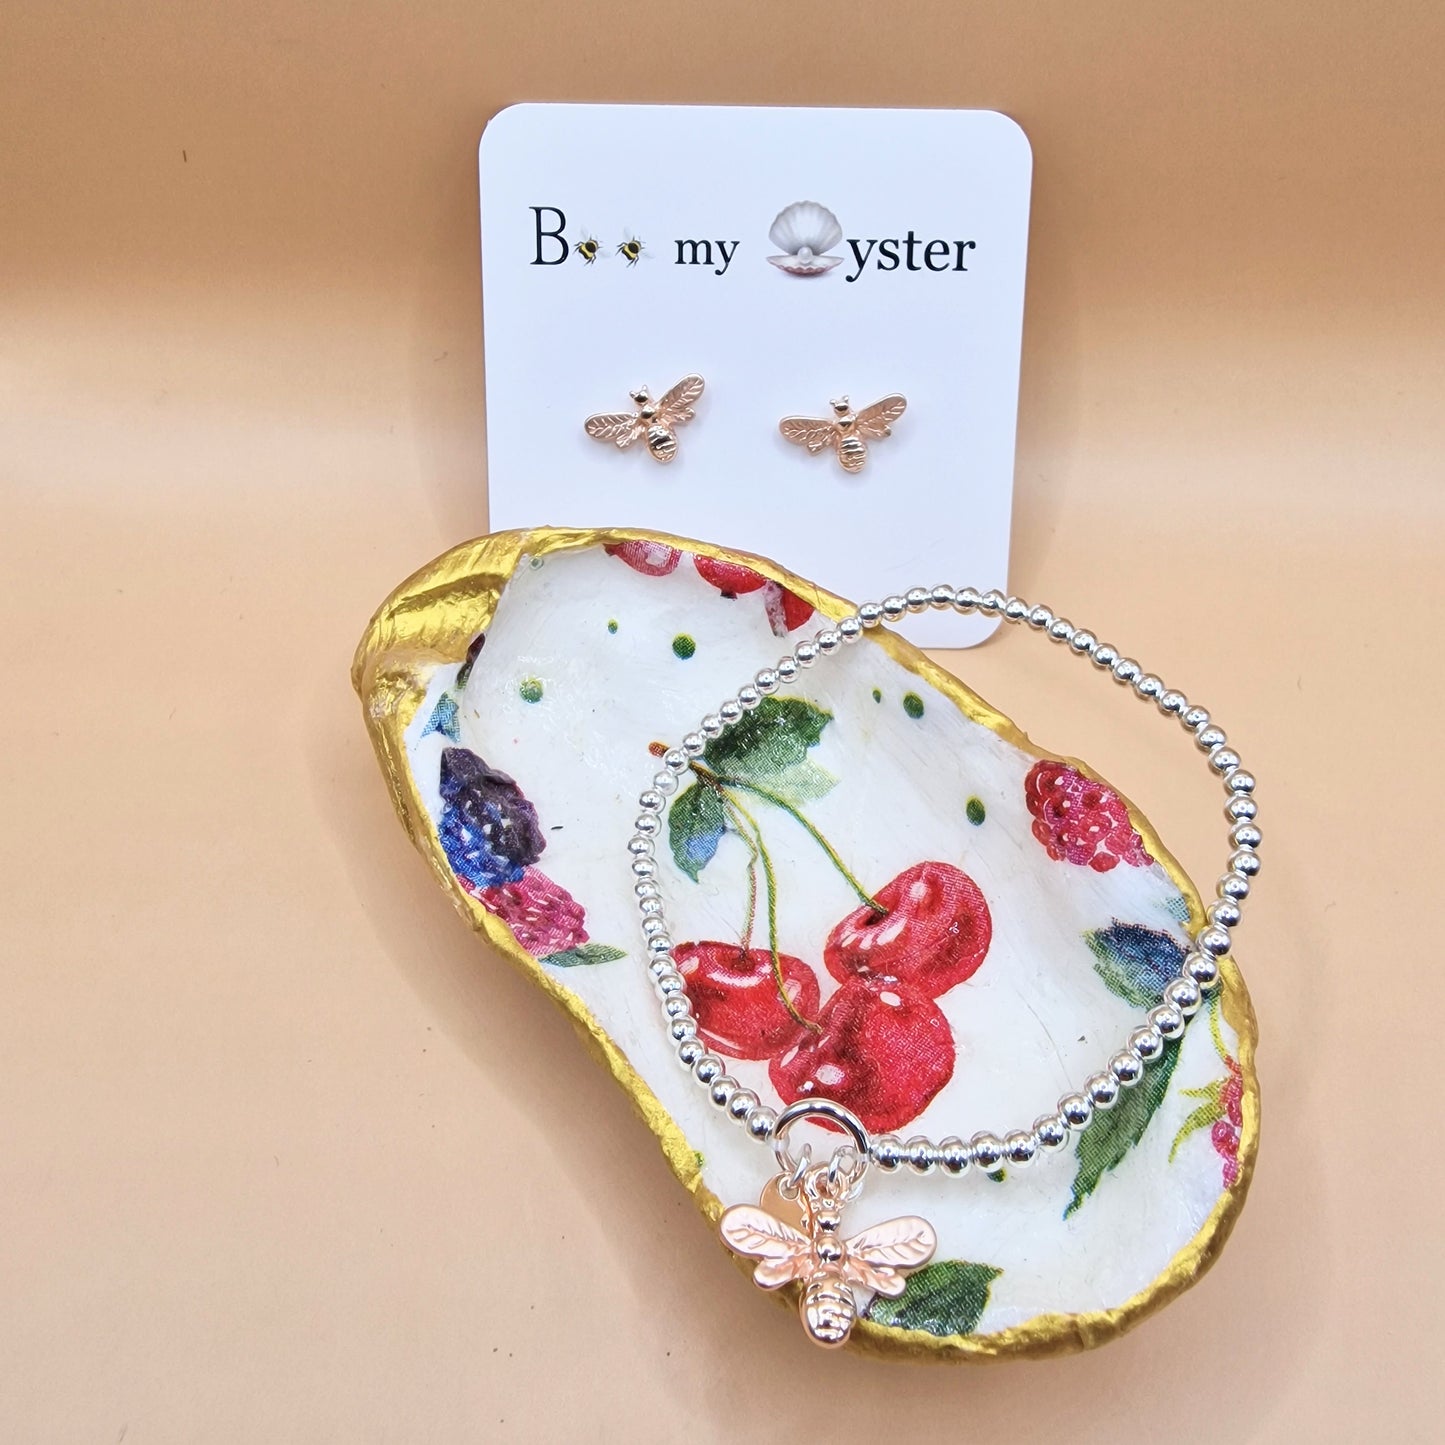 Cherries Small Oyster Shell Trinket Dish